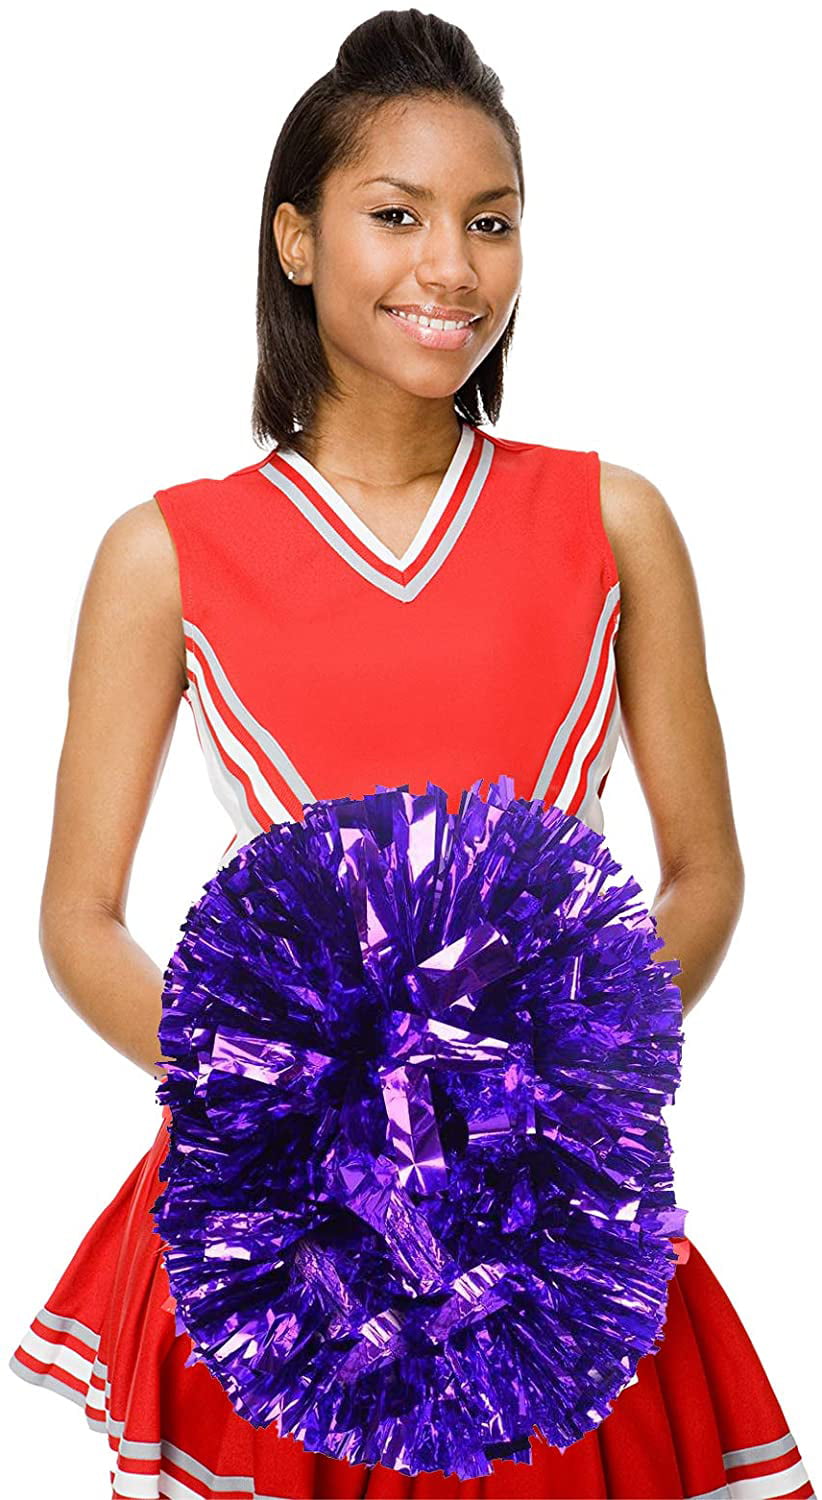 VGEBY1 2pcs Cheerleader Pom Poms Hand Flowers Cheerleader Pompoms for Sports Party Cheers Ball Dance Fancy Dress Night Party 